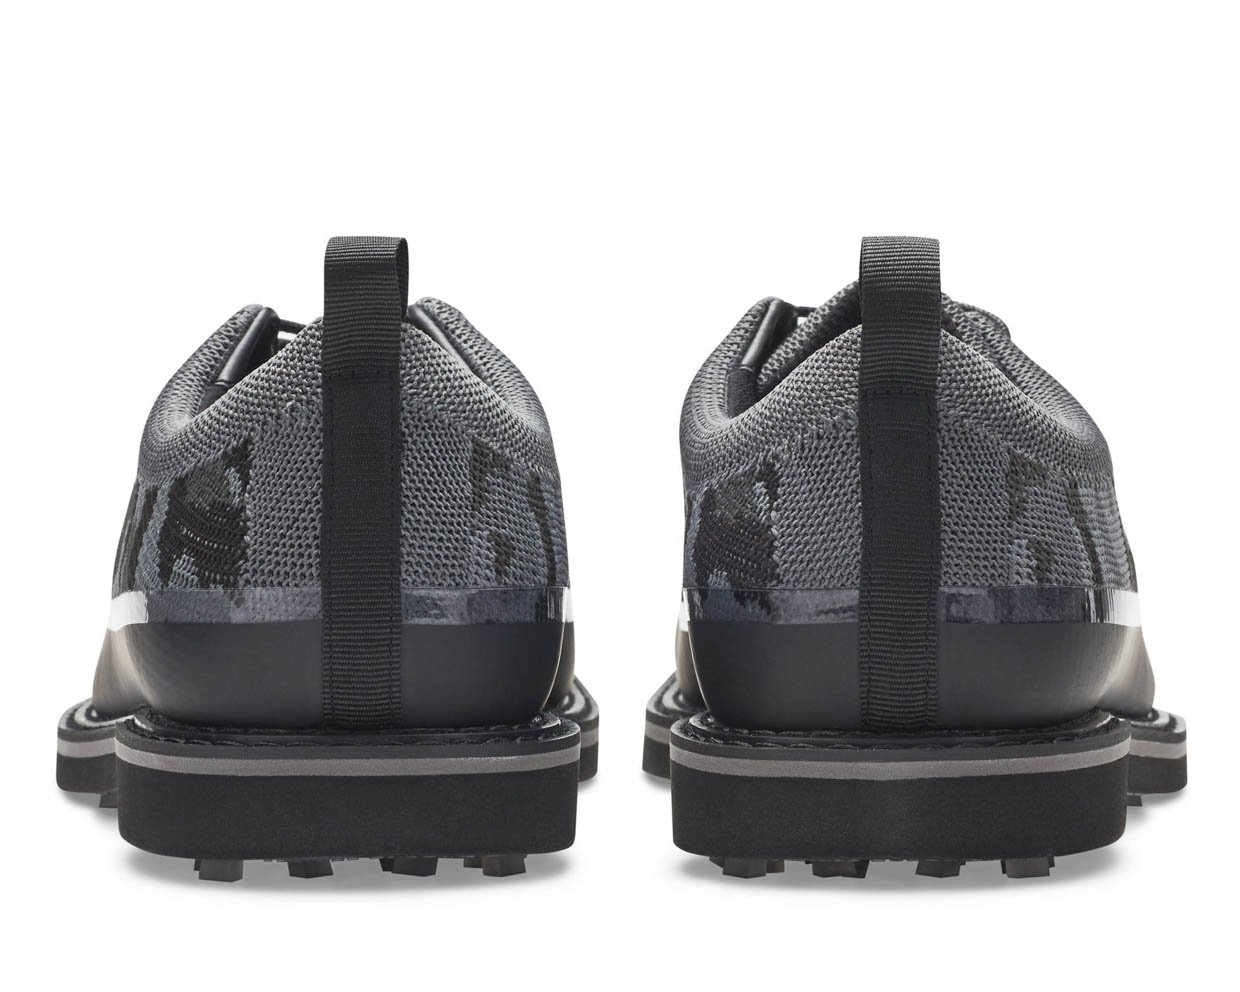 These Camouflage Golf Shoes Don't Look Like Golf Shoes